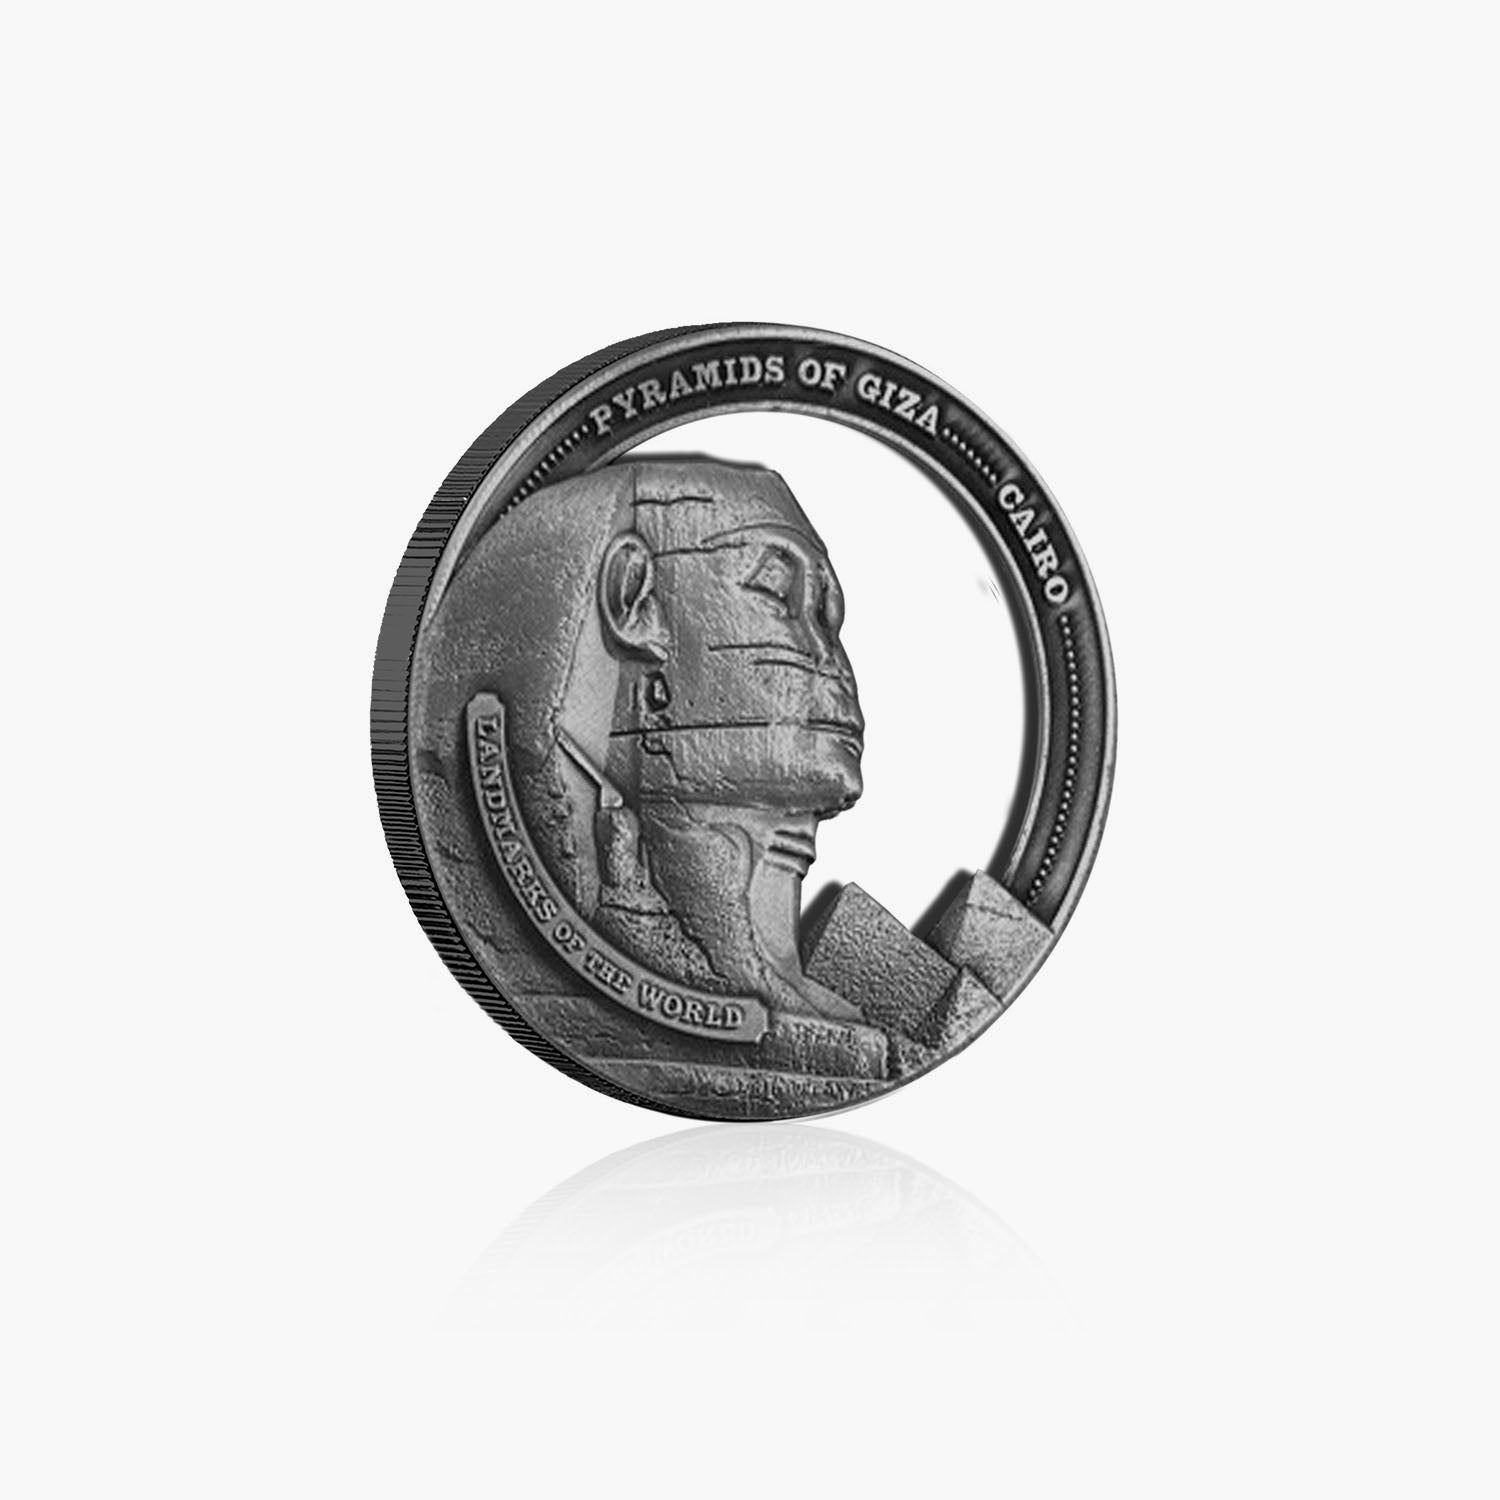 Landmarks of the World - Pyramids of Giza Coin